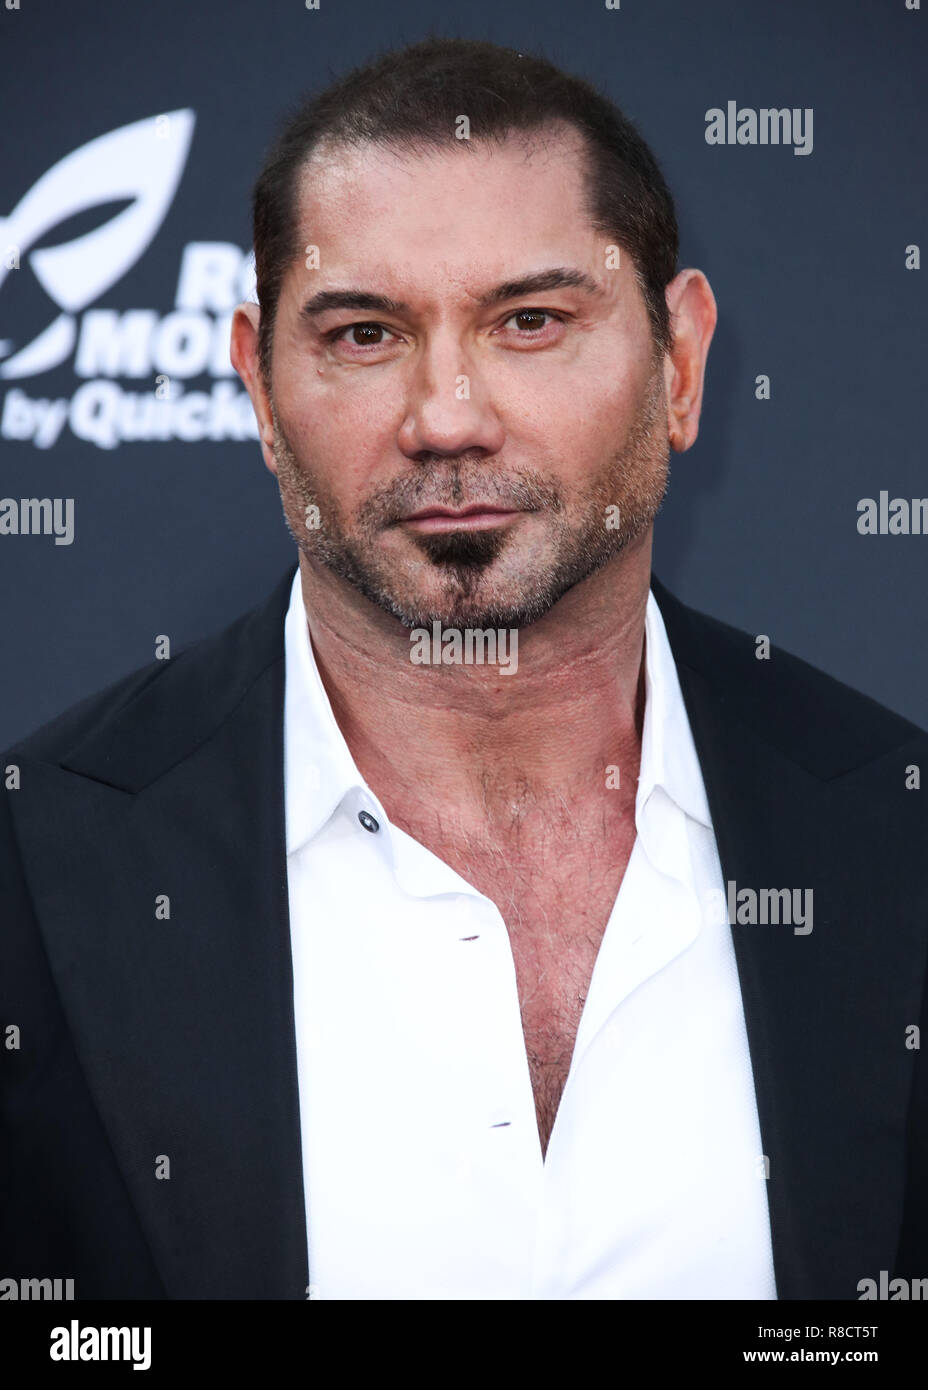 HOLLYWOOD, LOS ANGELES, CA, USA - APRIL 23: Dave Bautista at the World Premiere Of Disney And Marvel's 'Avengers: Infinity War' held at the El Capitan Theatre, Dolby Theatre and TCL Chinese Theatre IMAX on April 23, 2018 in Hollywood, Los Angeles, California, United States. (Photo by Xavier Collin/Image Press Agency) Stock Photo